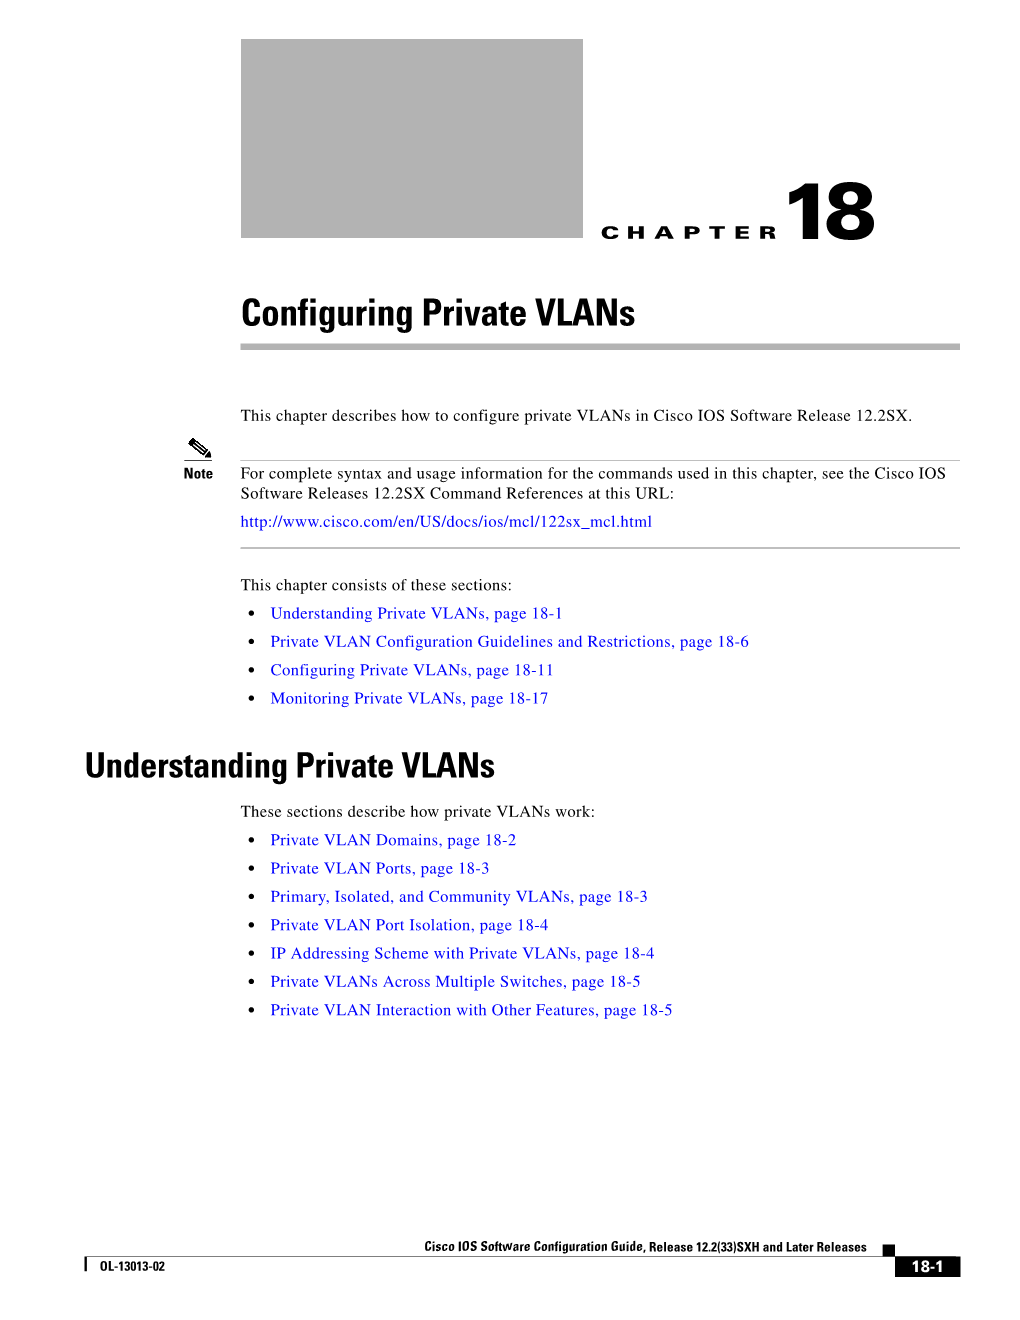 Configuring Private Vlans